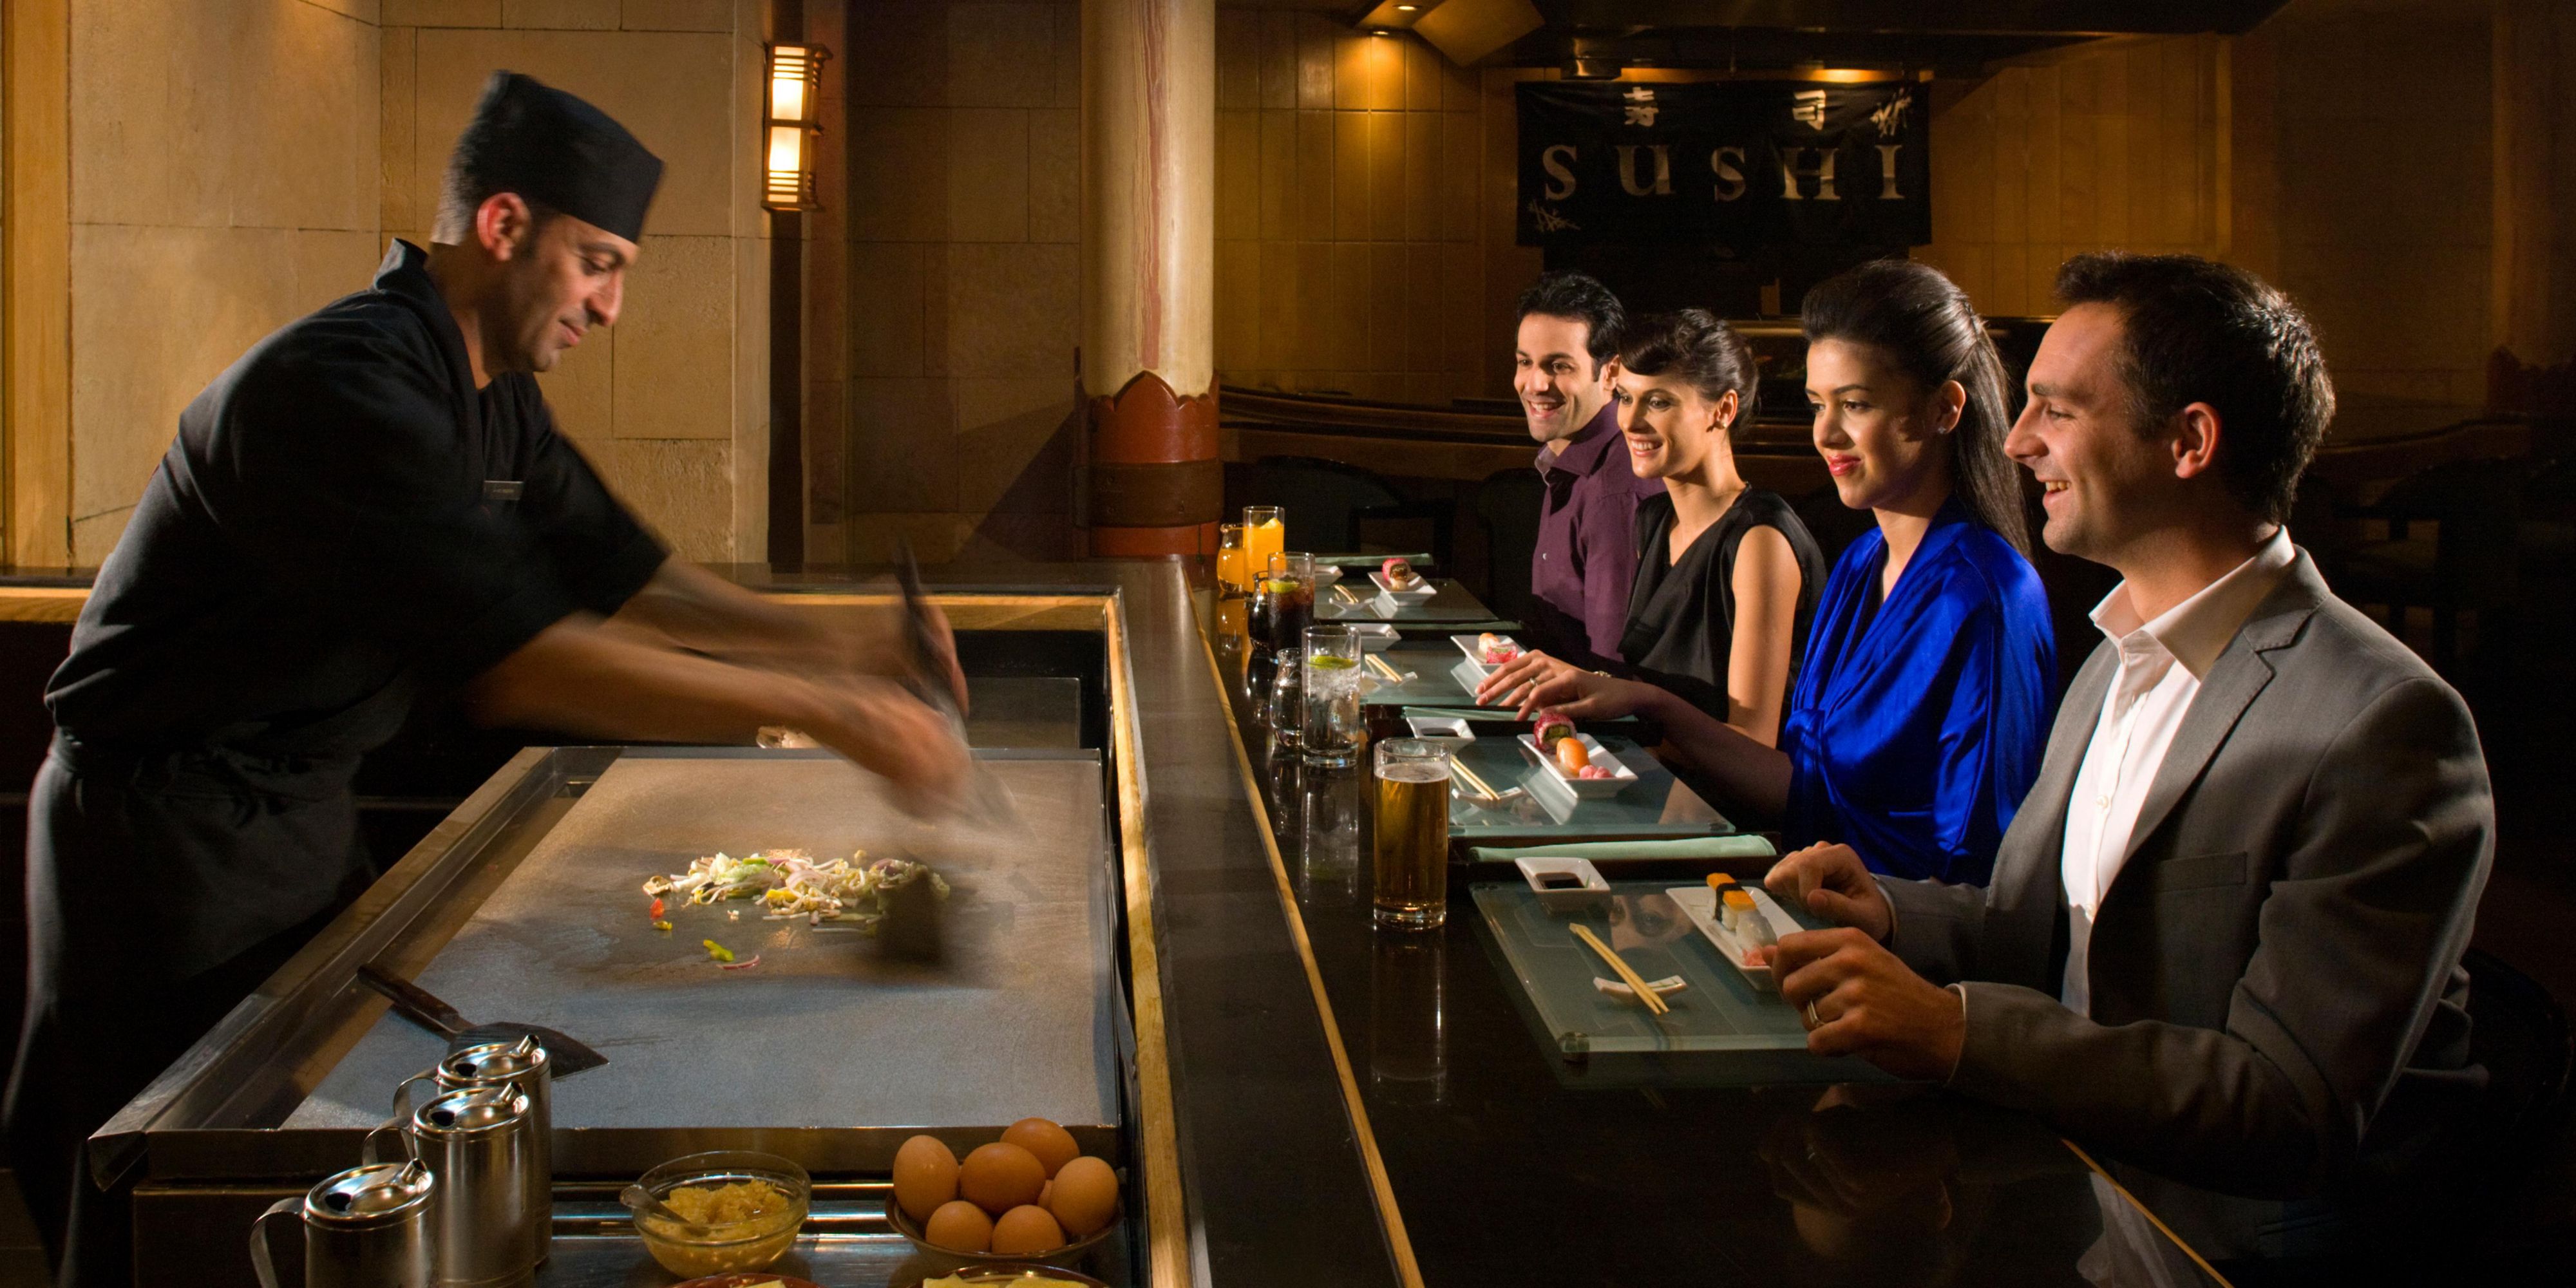 At Shogun, Japanese dining includes much more than sushi. Our talented chefs use their unique knowledge and talent to create a vast selection of exquisite Japanese delicacies. Each dish is cooked in a way that best captures the genuine flavours of this authentic cuisine. Whatever mode you are in, there is an adventure waiting to be explored.